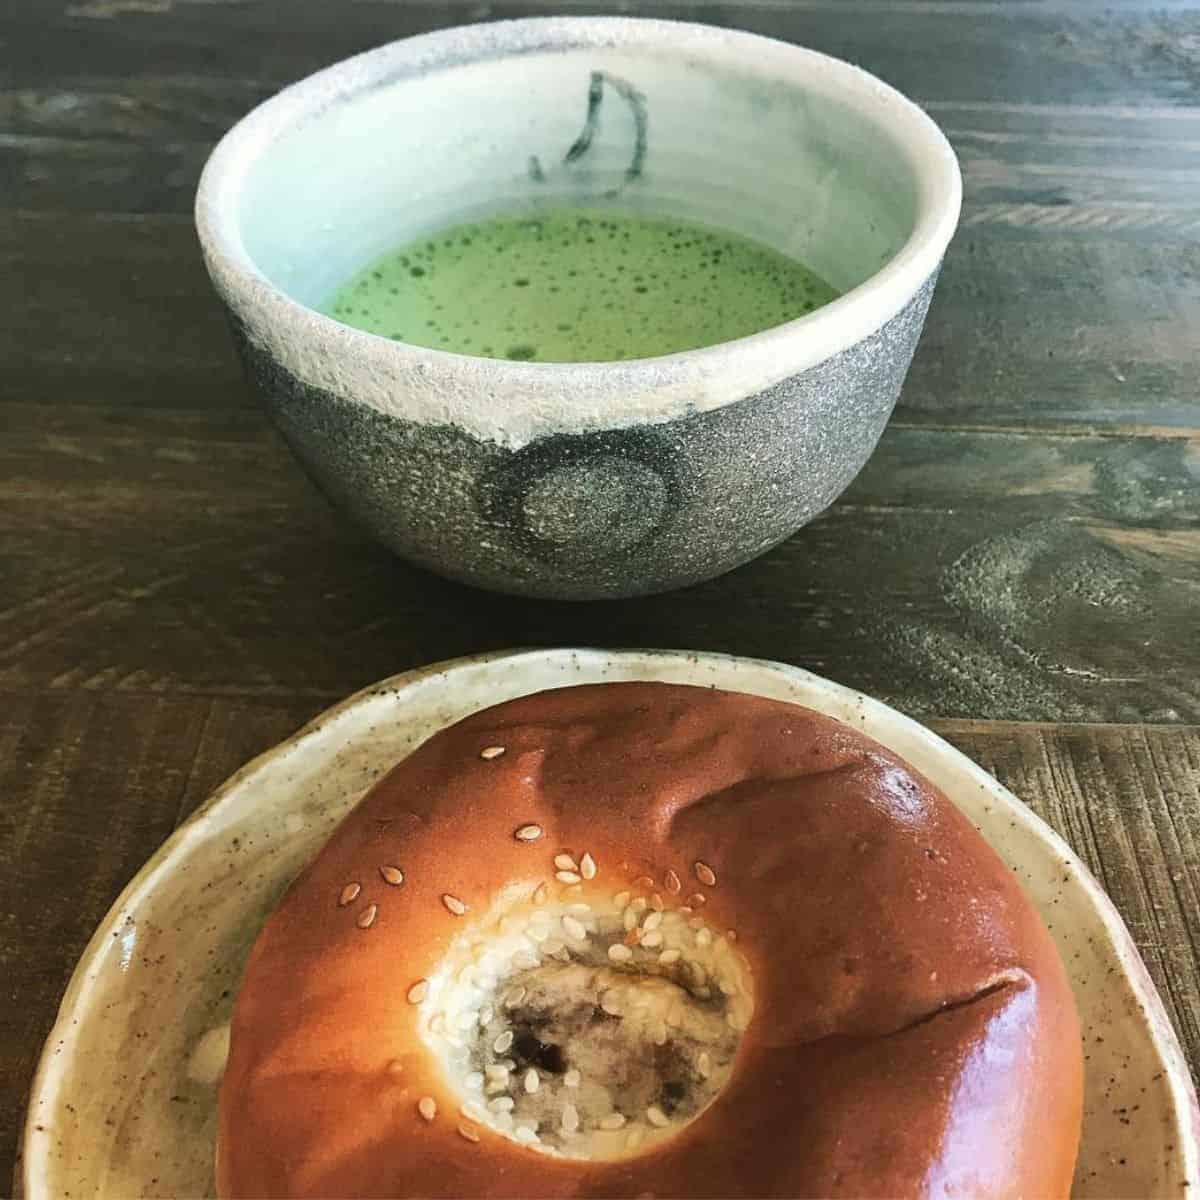 Japanese pastry with Matcha latte